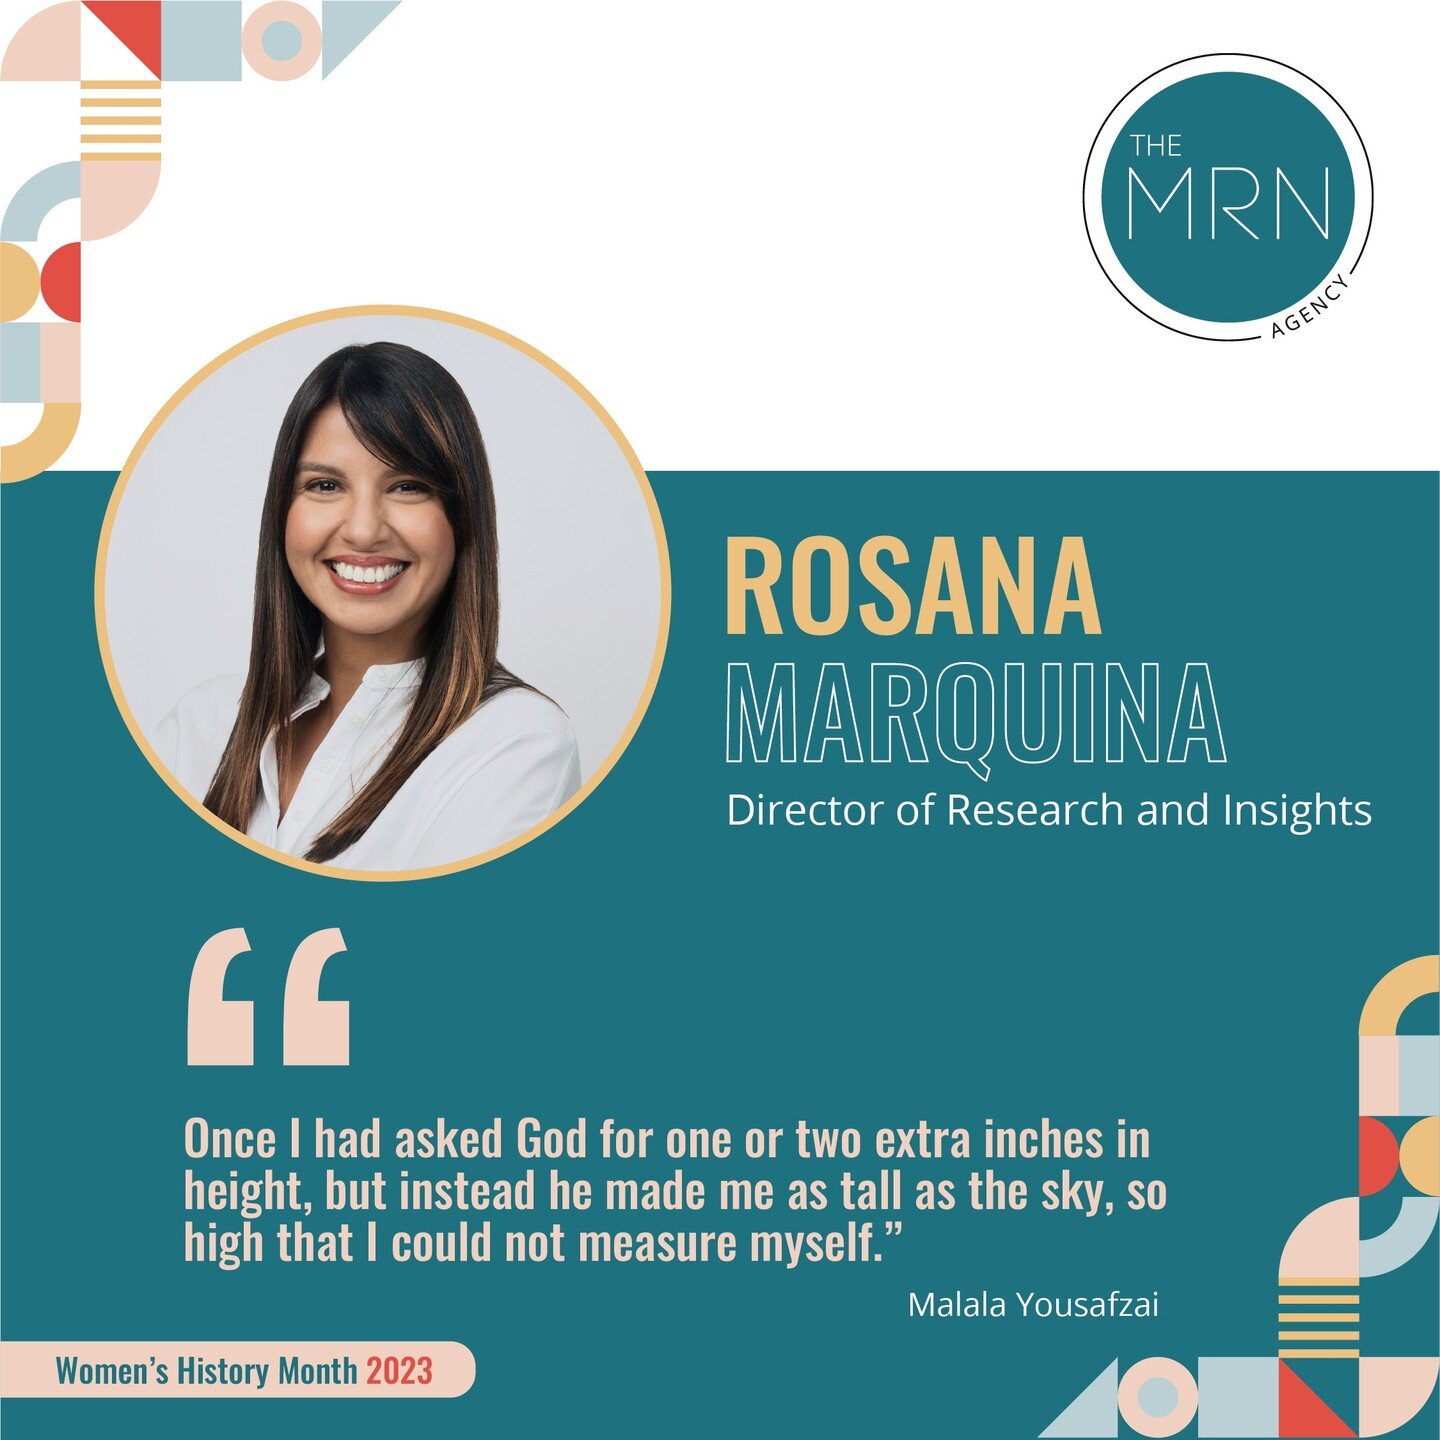 MRN is celebrating Women&rsquo;s History Month by highlighting the women who&rsquo;ve inspired our team!

Rosana Marquina, our Director of Research and Insights, is inspired by&nbsp;this quote from Malala Yousafzai.

&ldquo;Once I had asked God for o